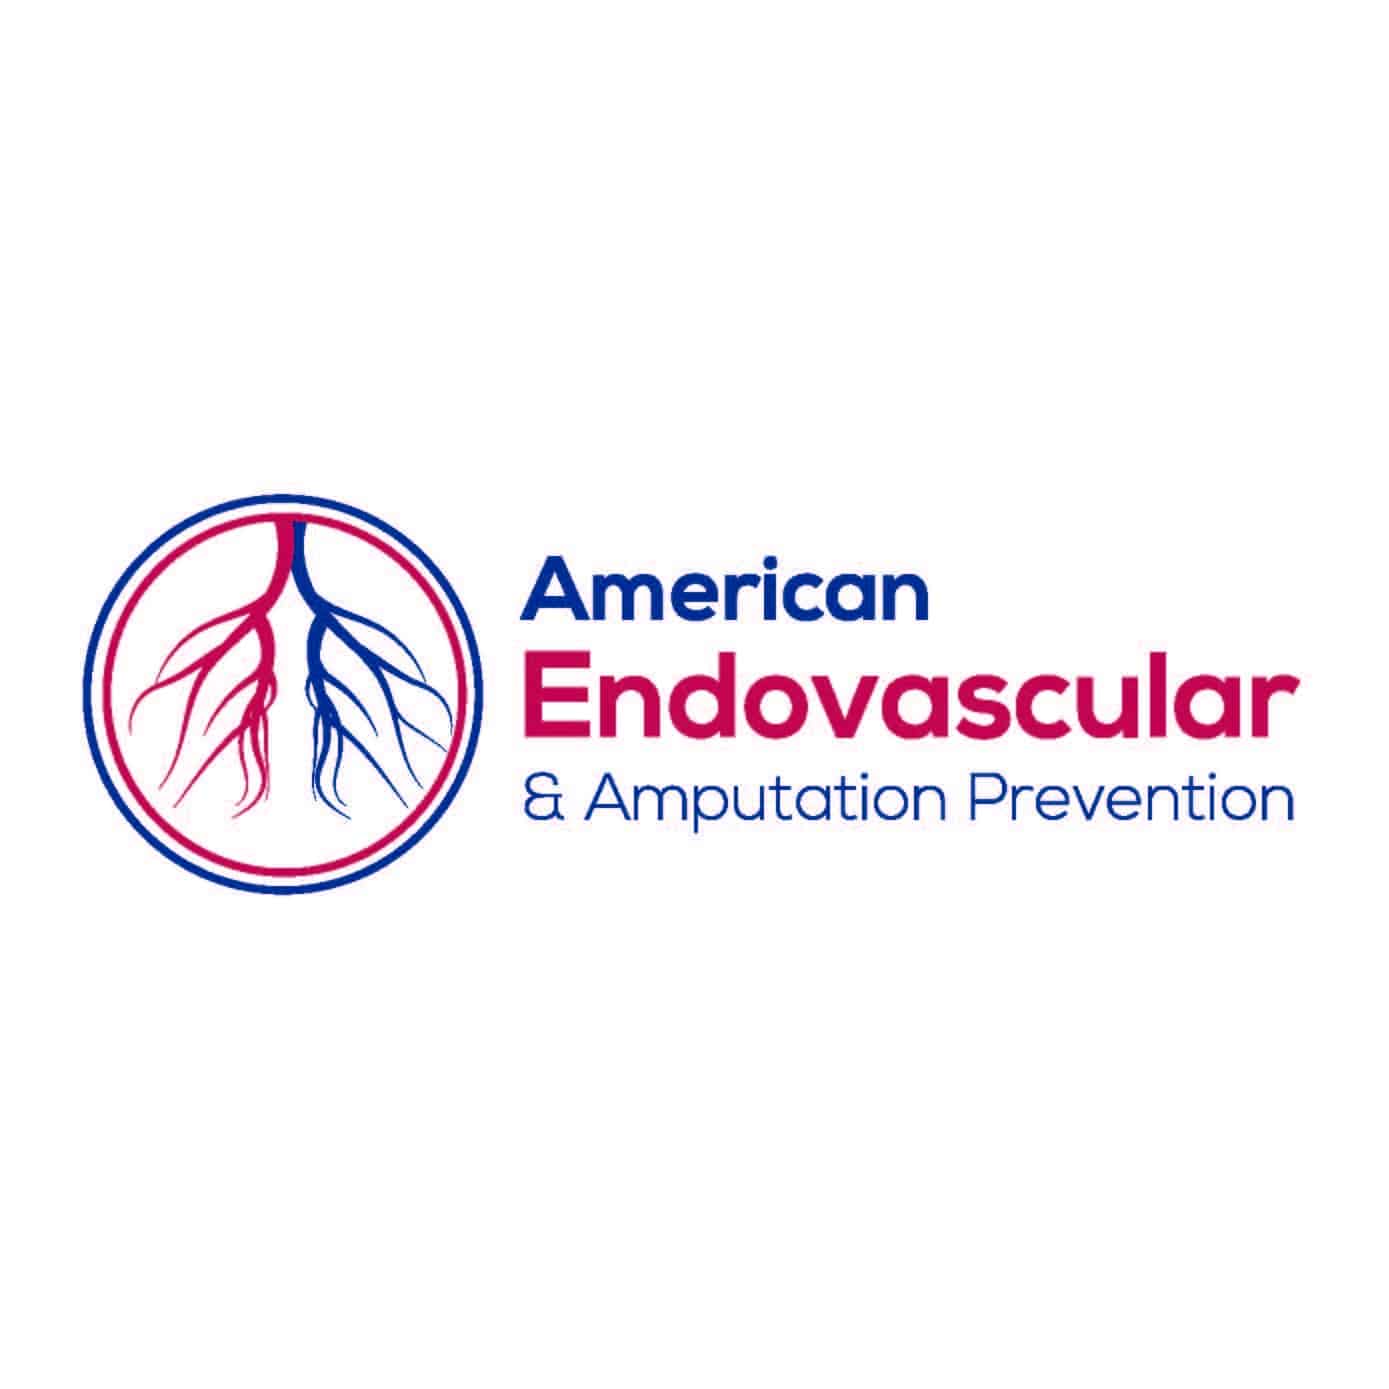 American Endovascular And Amputation Prevention Llc Transitions To Eclinicalworks To Eliminate 